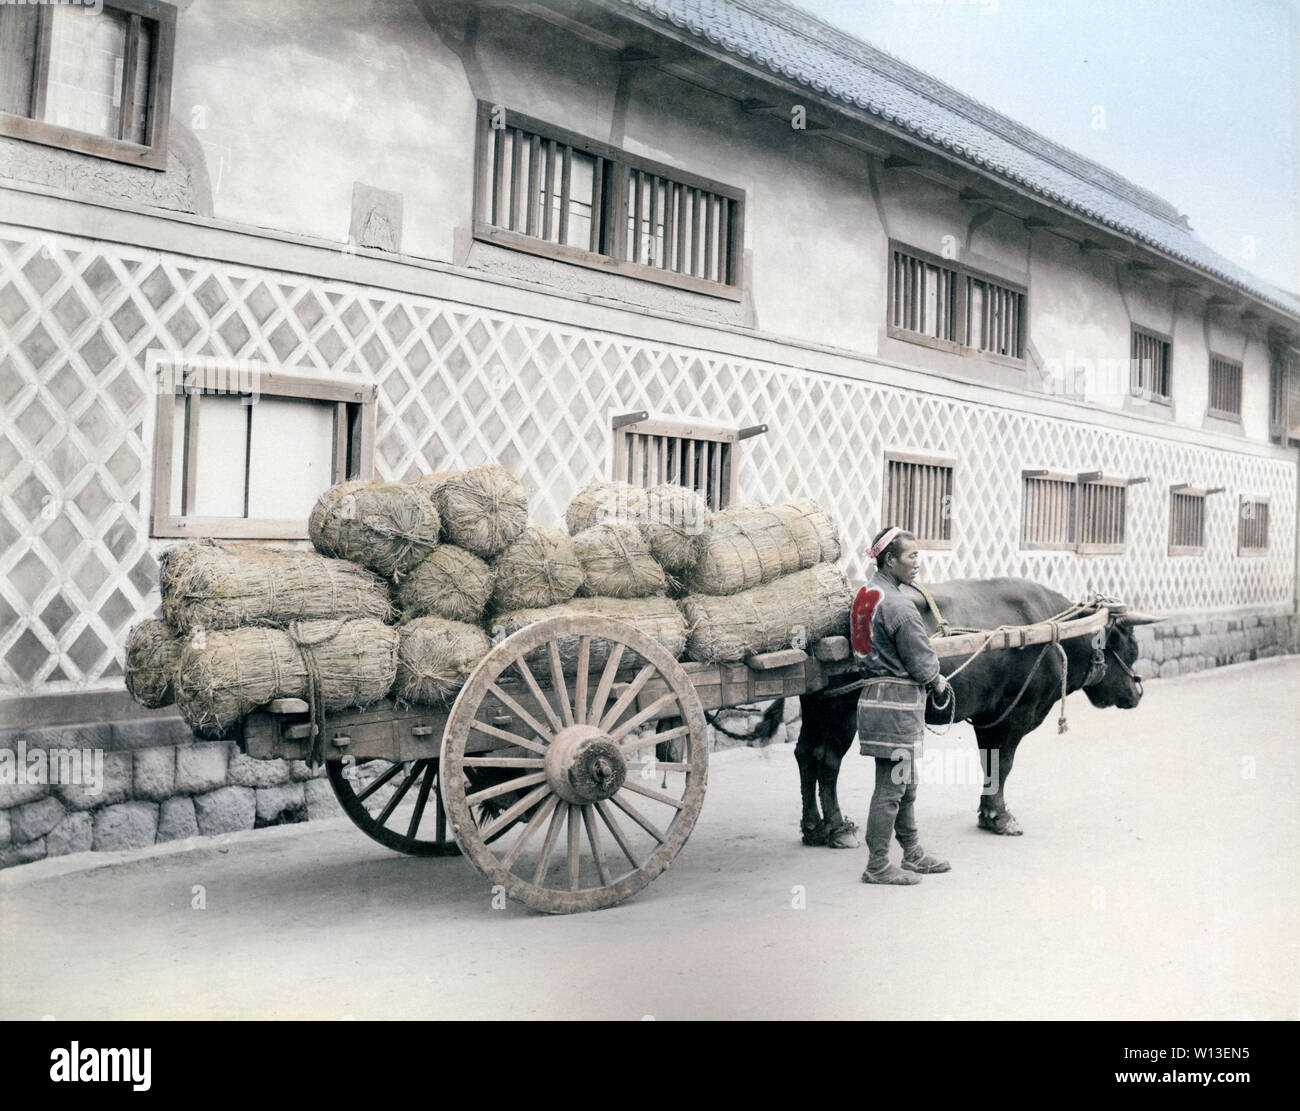 [ 1890s Japan - Japanese Ox cart with Rice Bags ] —   A man stands next to an gyusha (牛車, ox cart) loaded with tawara (俵, straw rice bags).  19th century vintage albumen photograph. Stock Photo